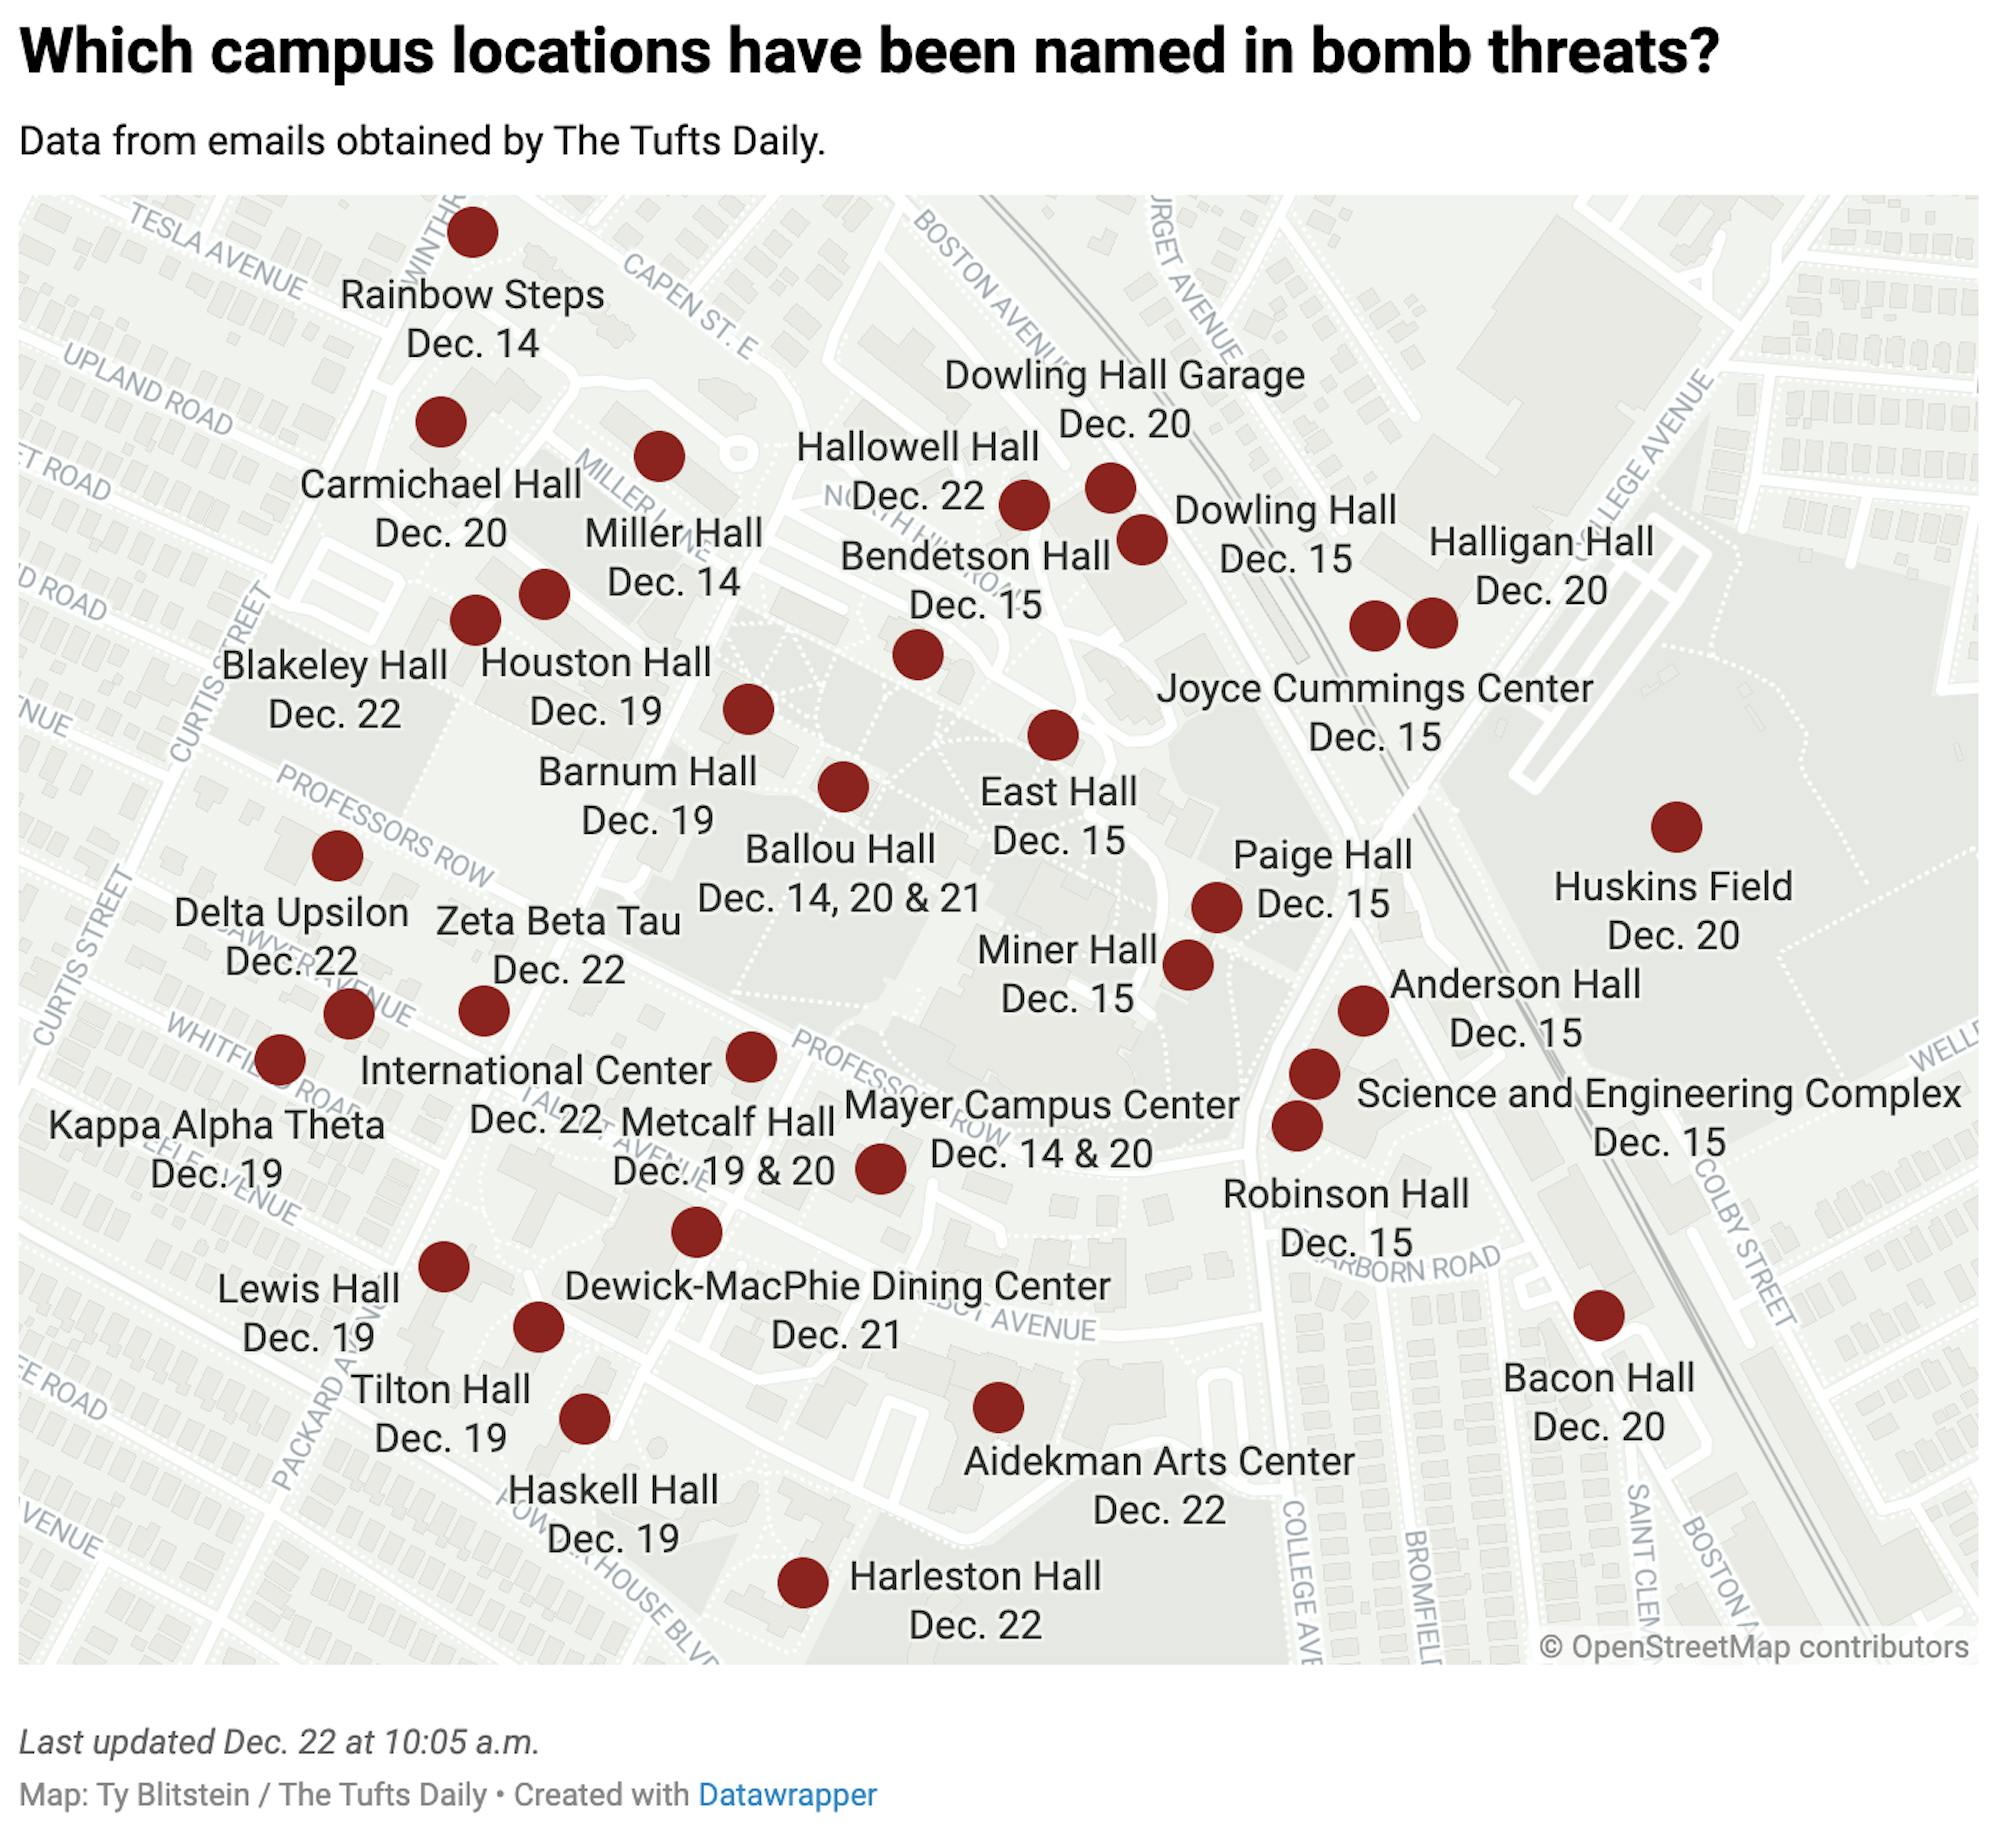 Which campus locations have been named in bomb threats?